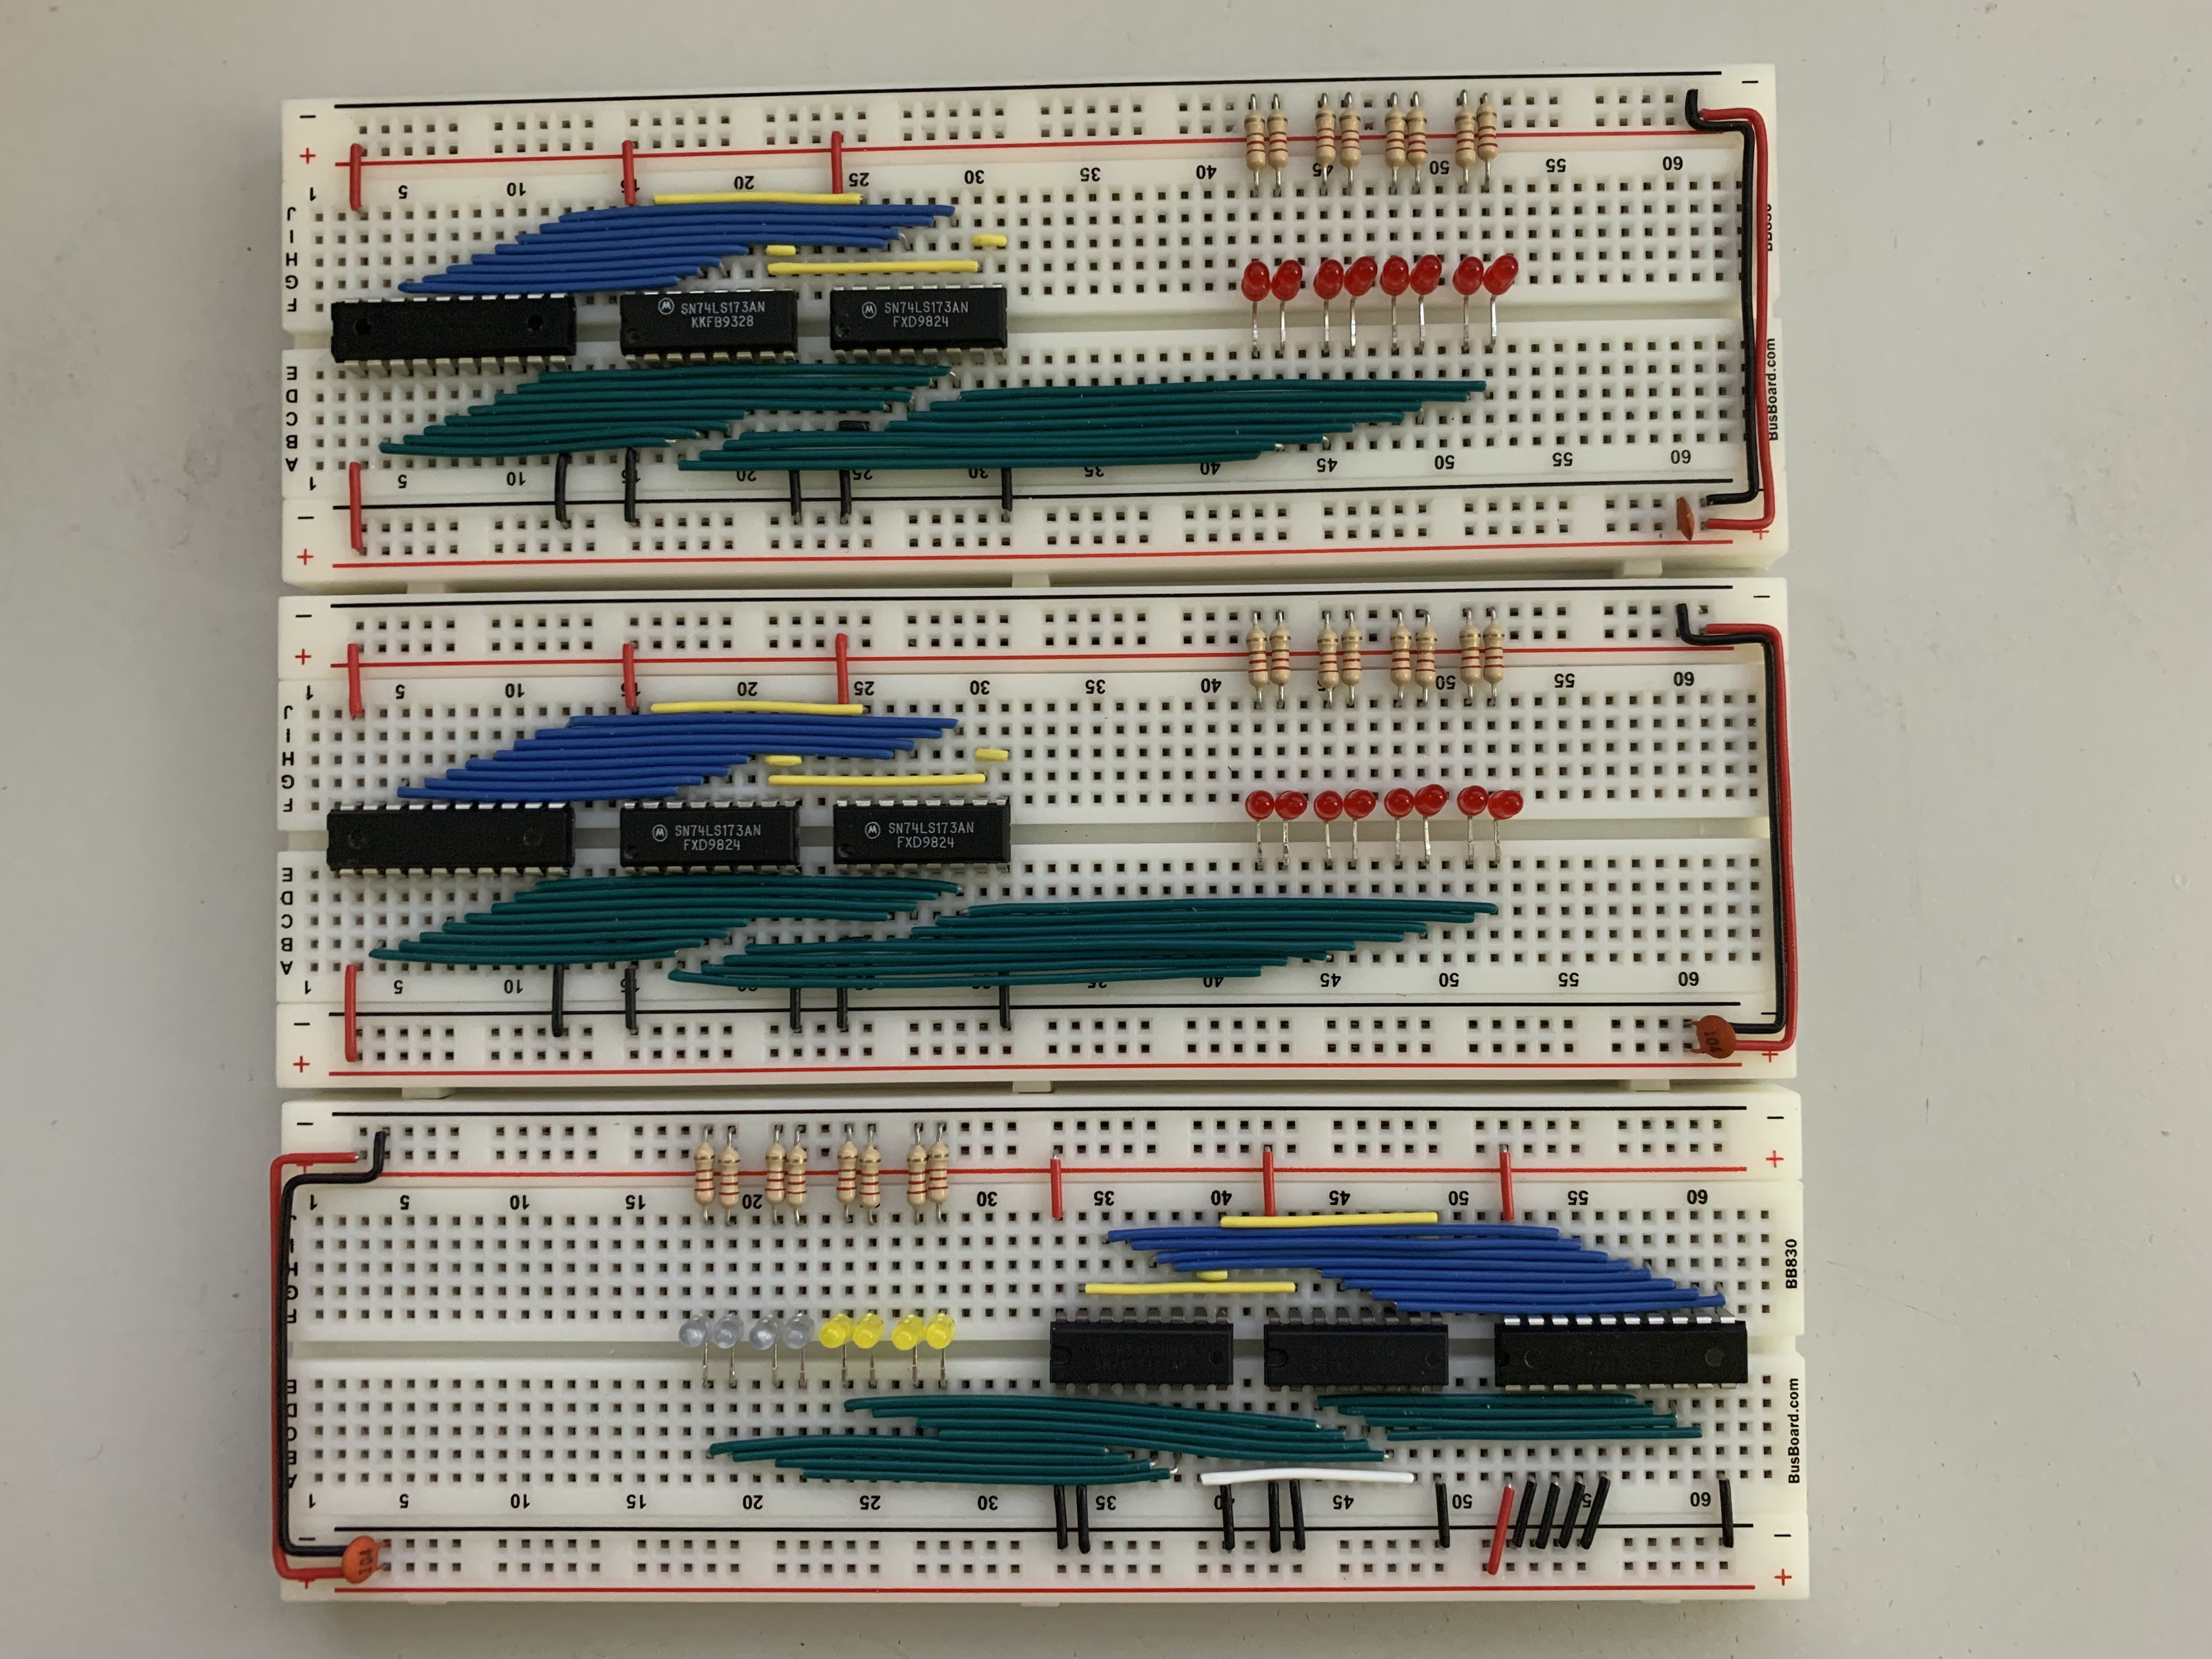 An image of 3 breadboards all populated in a similar way, except two have 8 red LEDs and one has 4 blue and 4 yellow LEDs. The blue and yellow breadboard also has its orientation flipped so the LEDs are on the left side instead of the right like the red boards.